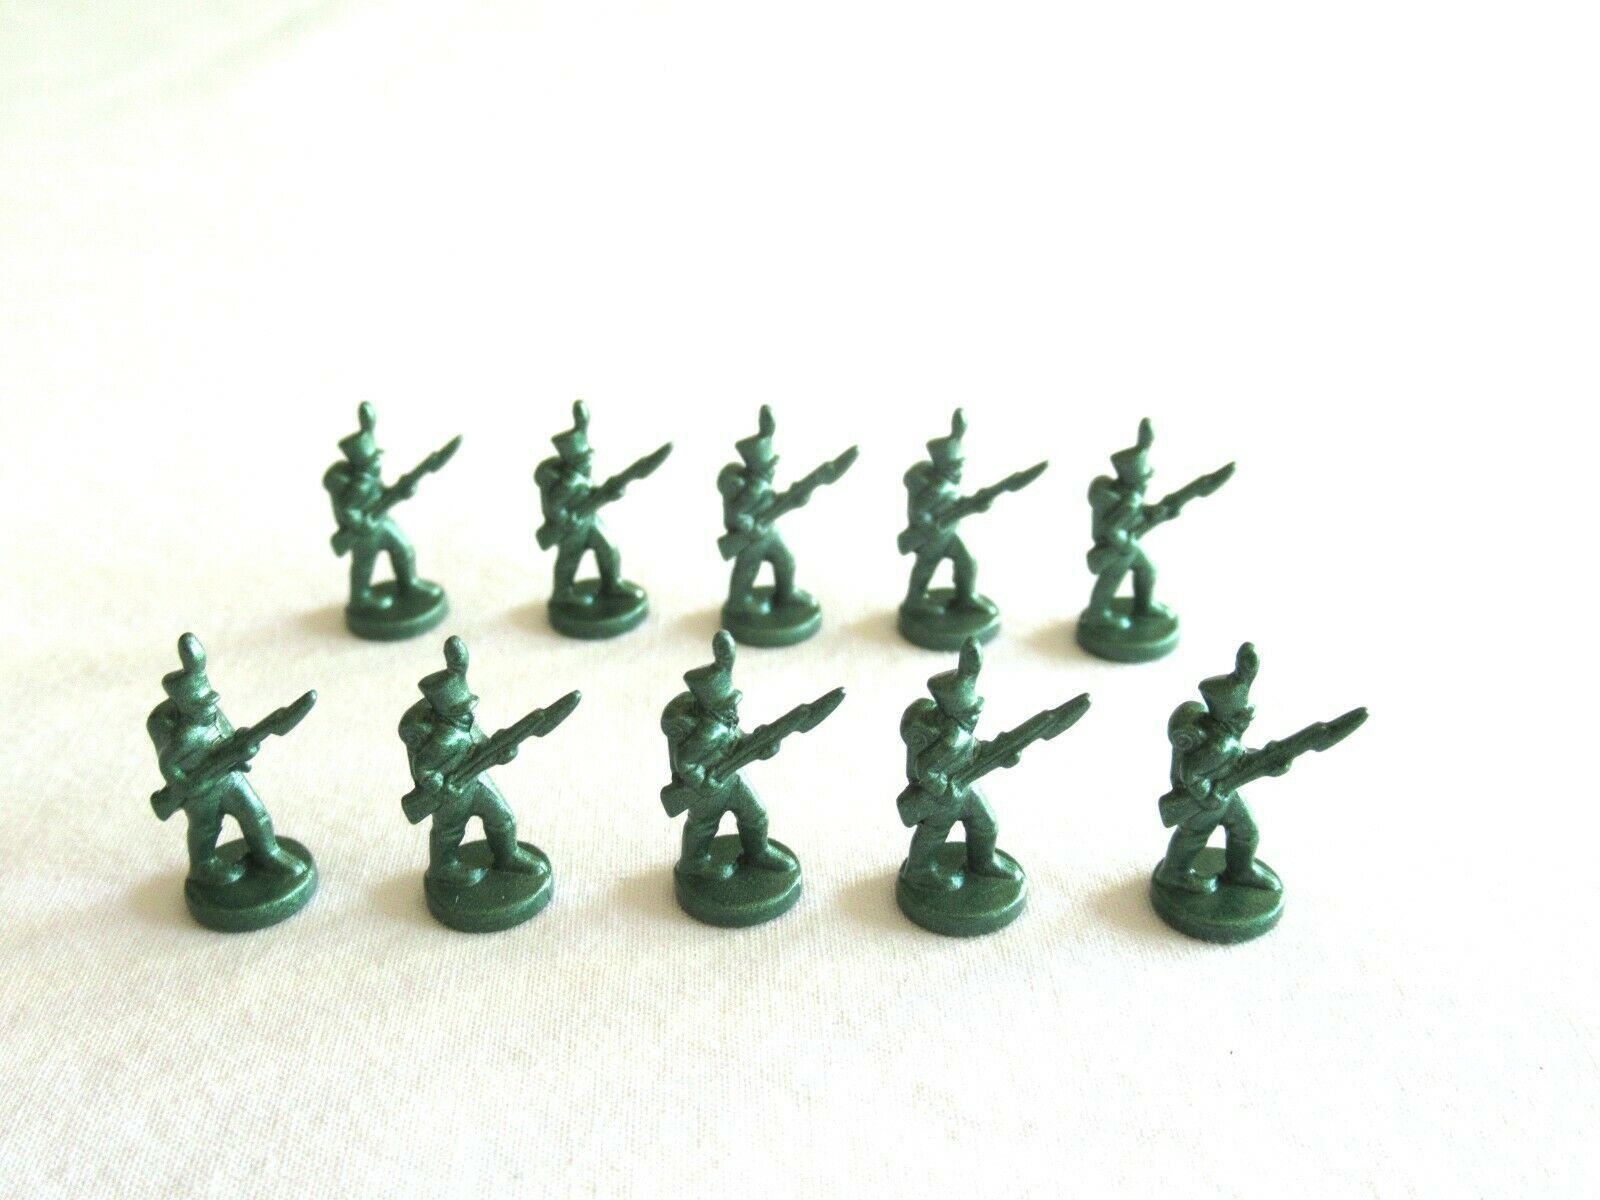 10x Risk 40th Anniversary Edition Board Game Metal Soldier Infantry Green Army